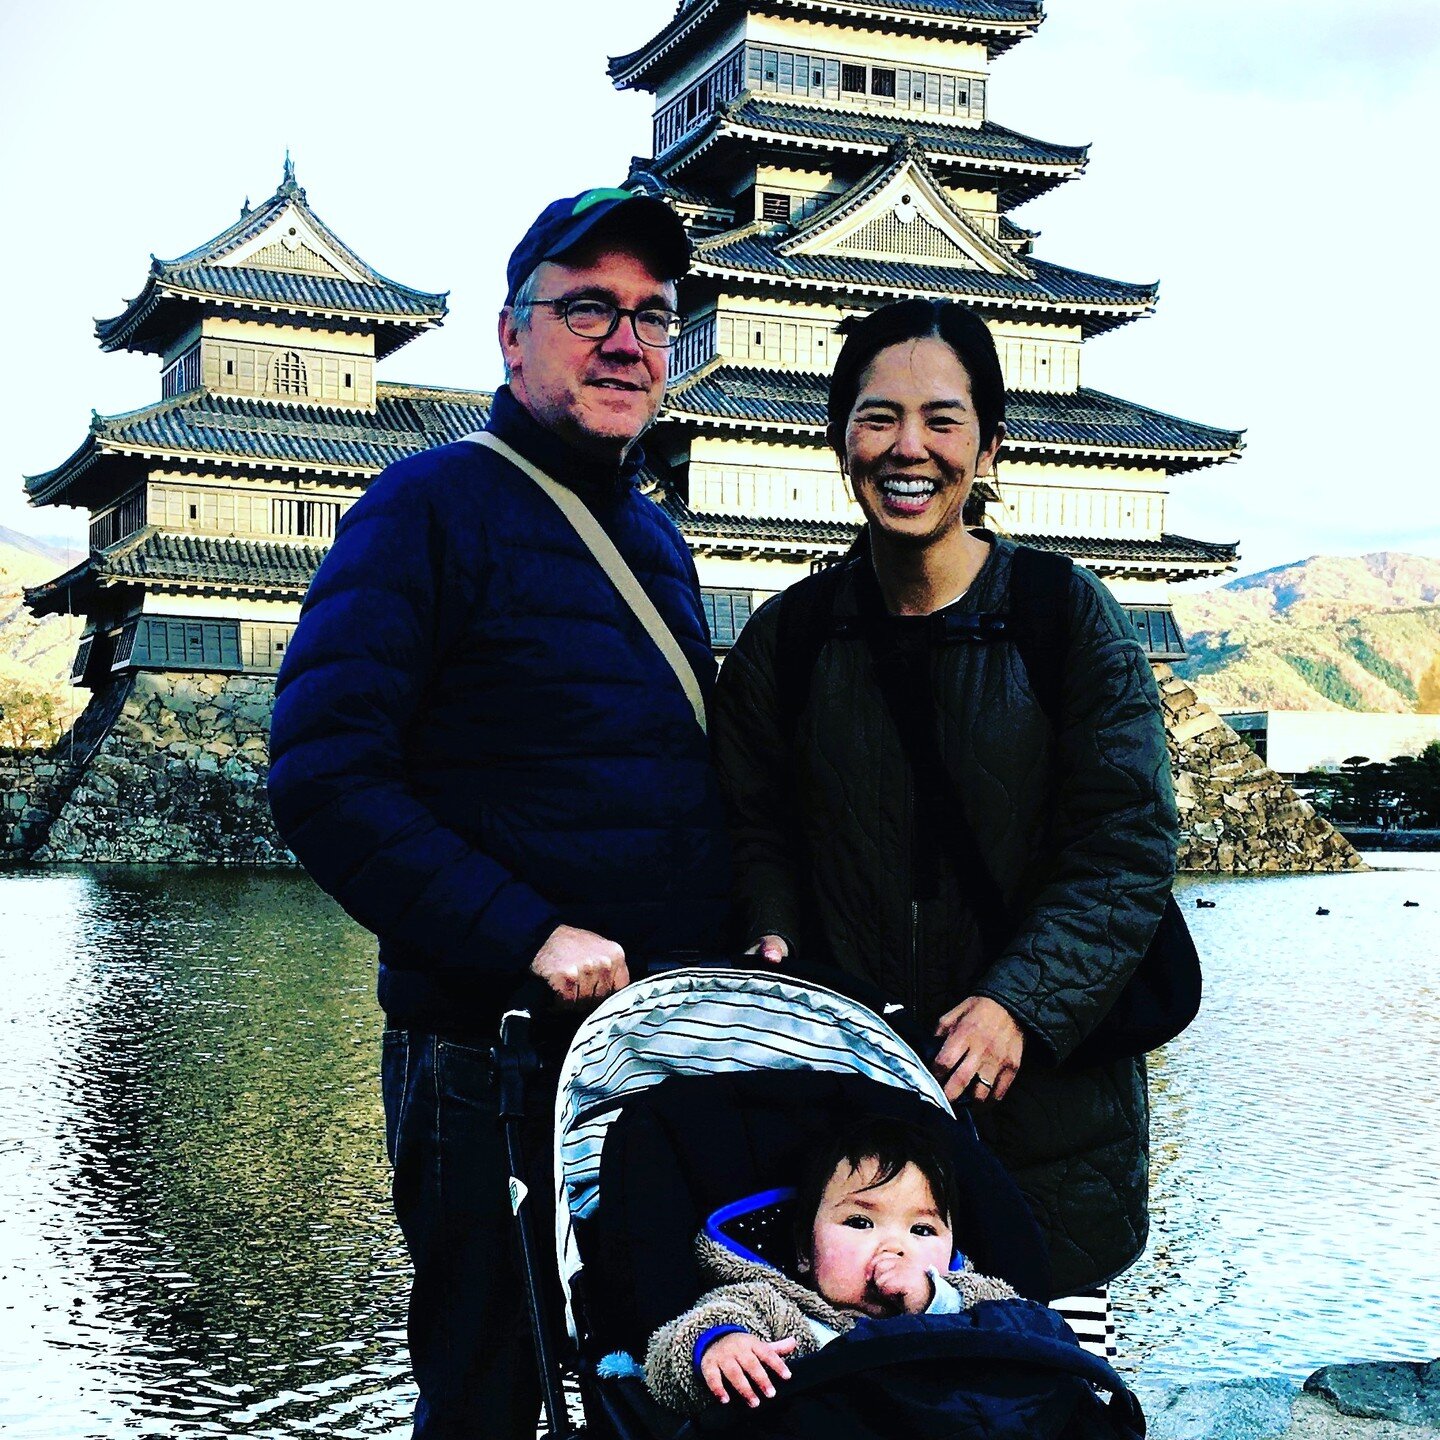 New within the old, and old within the new. A new city for us, to live. But the same old central Nagano stomping grounds. Still, a move that was overdue. Matsumoto, yoroshiku, ne...
Change is afoot, and more to come

#MatsumotoCastle #Matsumoto #Next